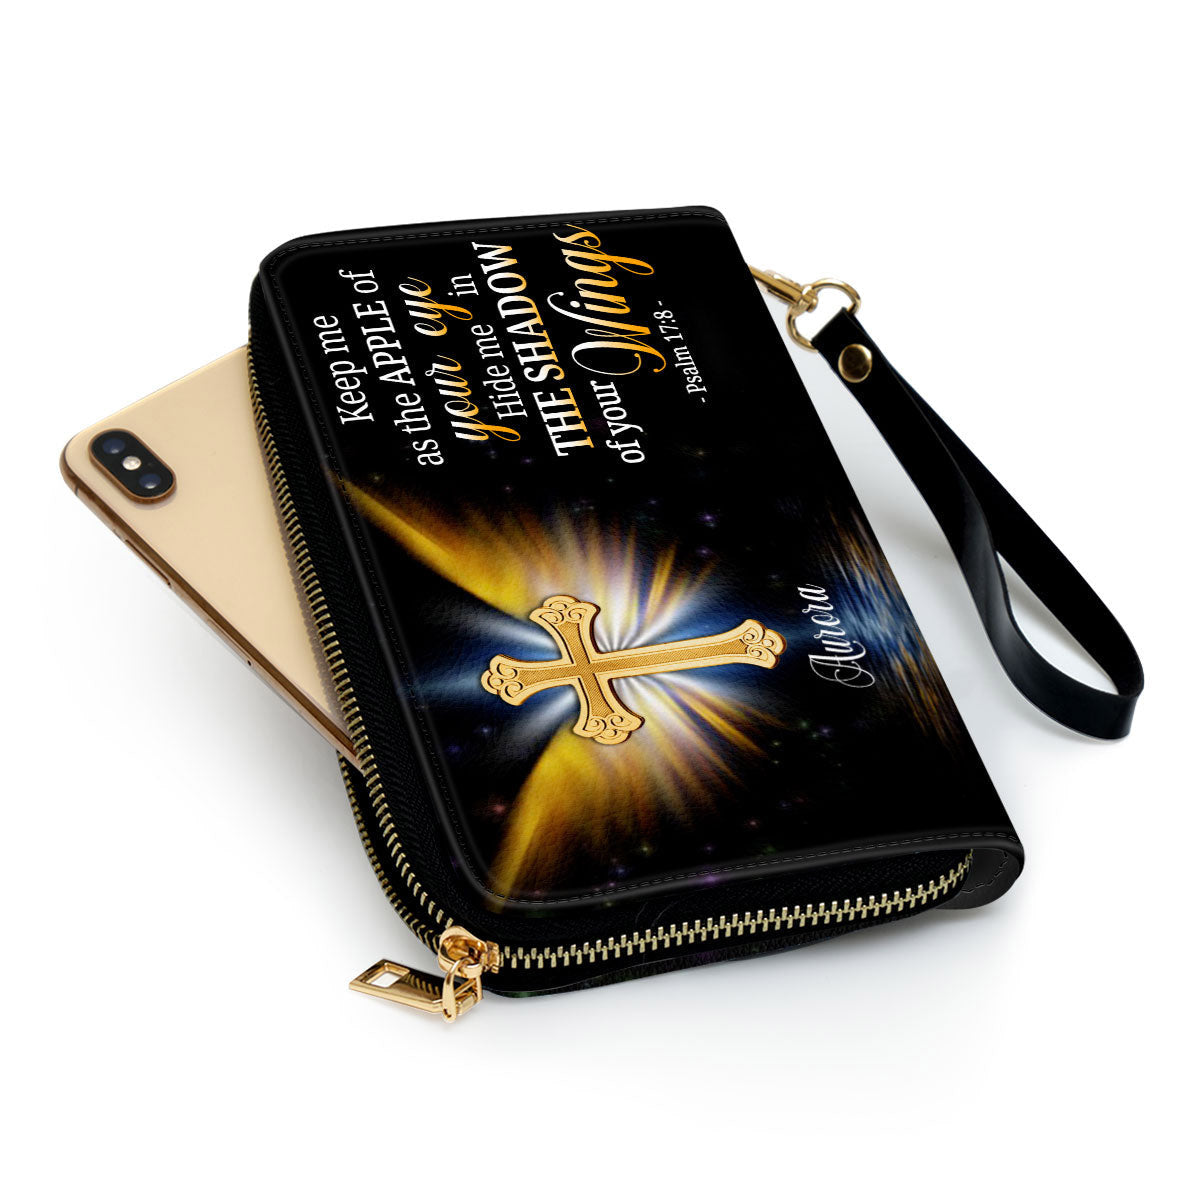 With Wristlet Strap Handle Psalm 178 Scripture Gifts For Women Clutch Purse For Women - Personalized Name - Christian Gifts For Women